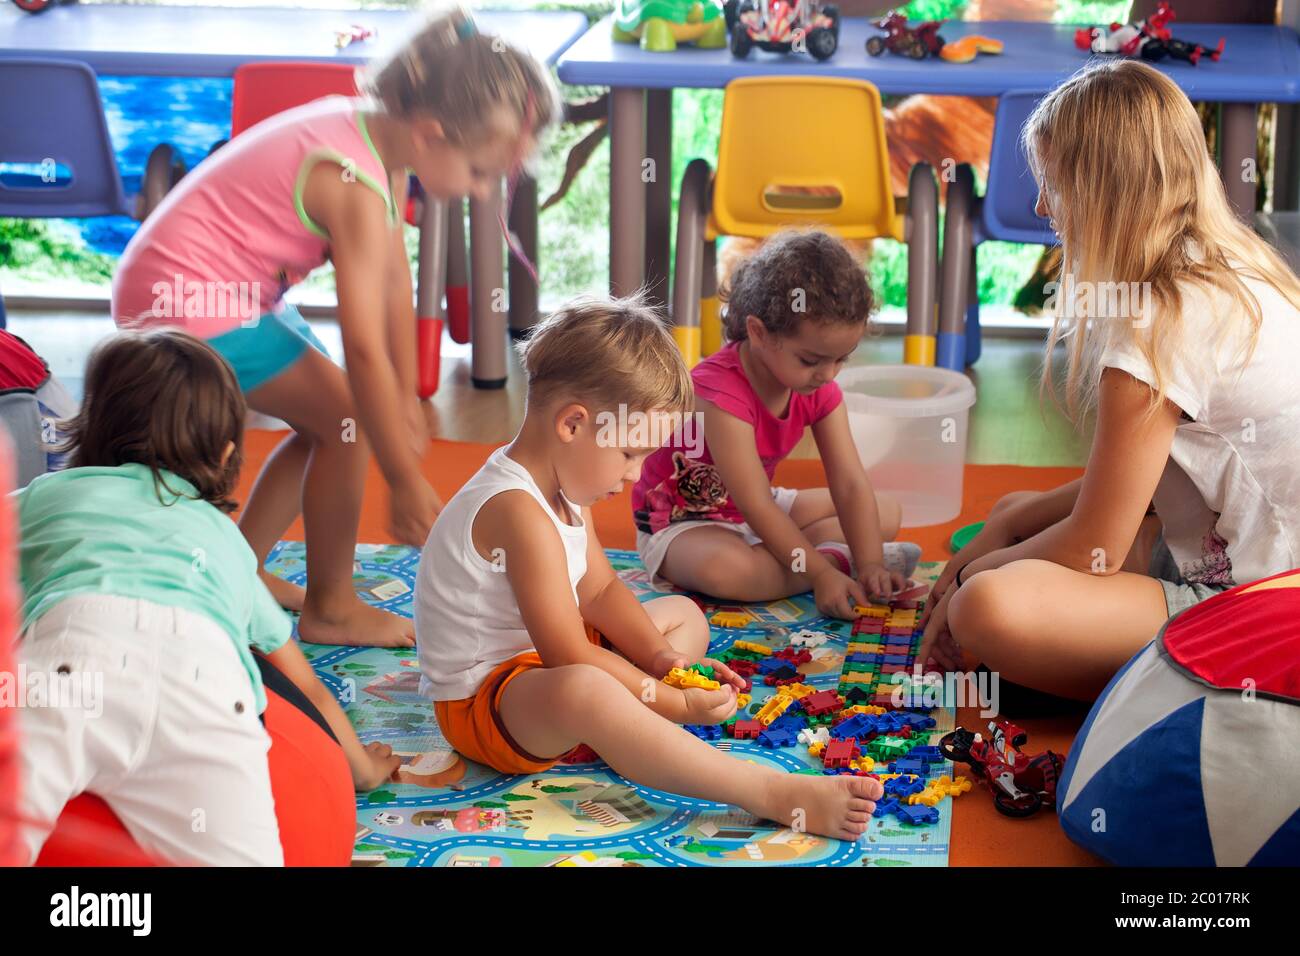 Children playing games in nursery Stock Photo